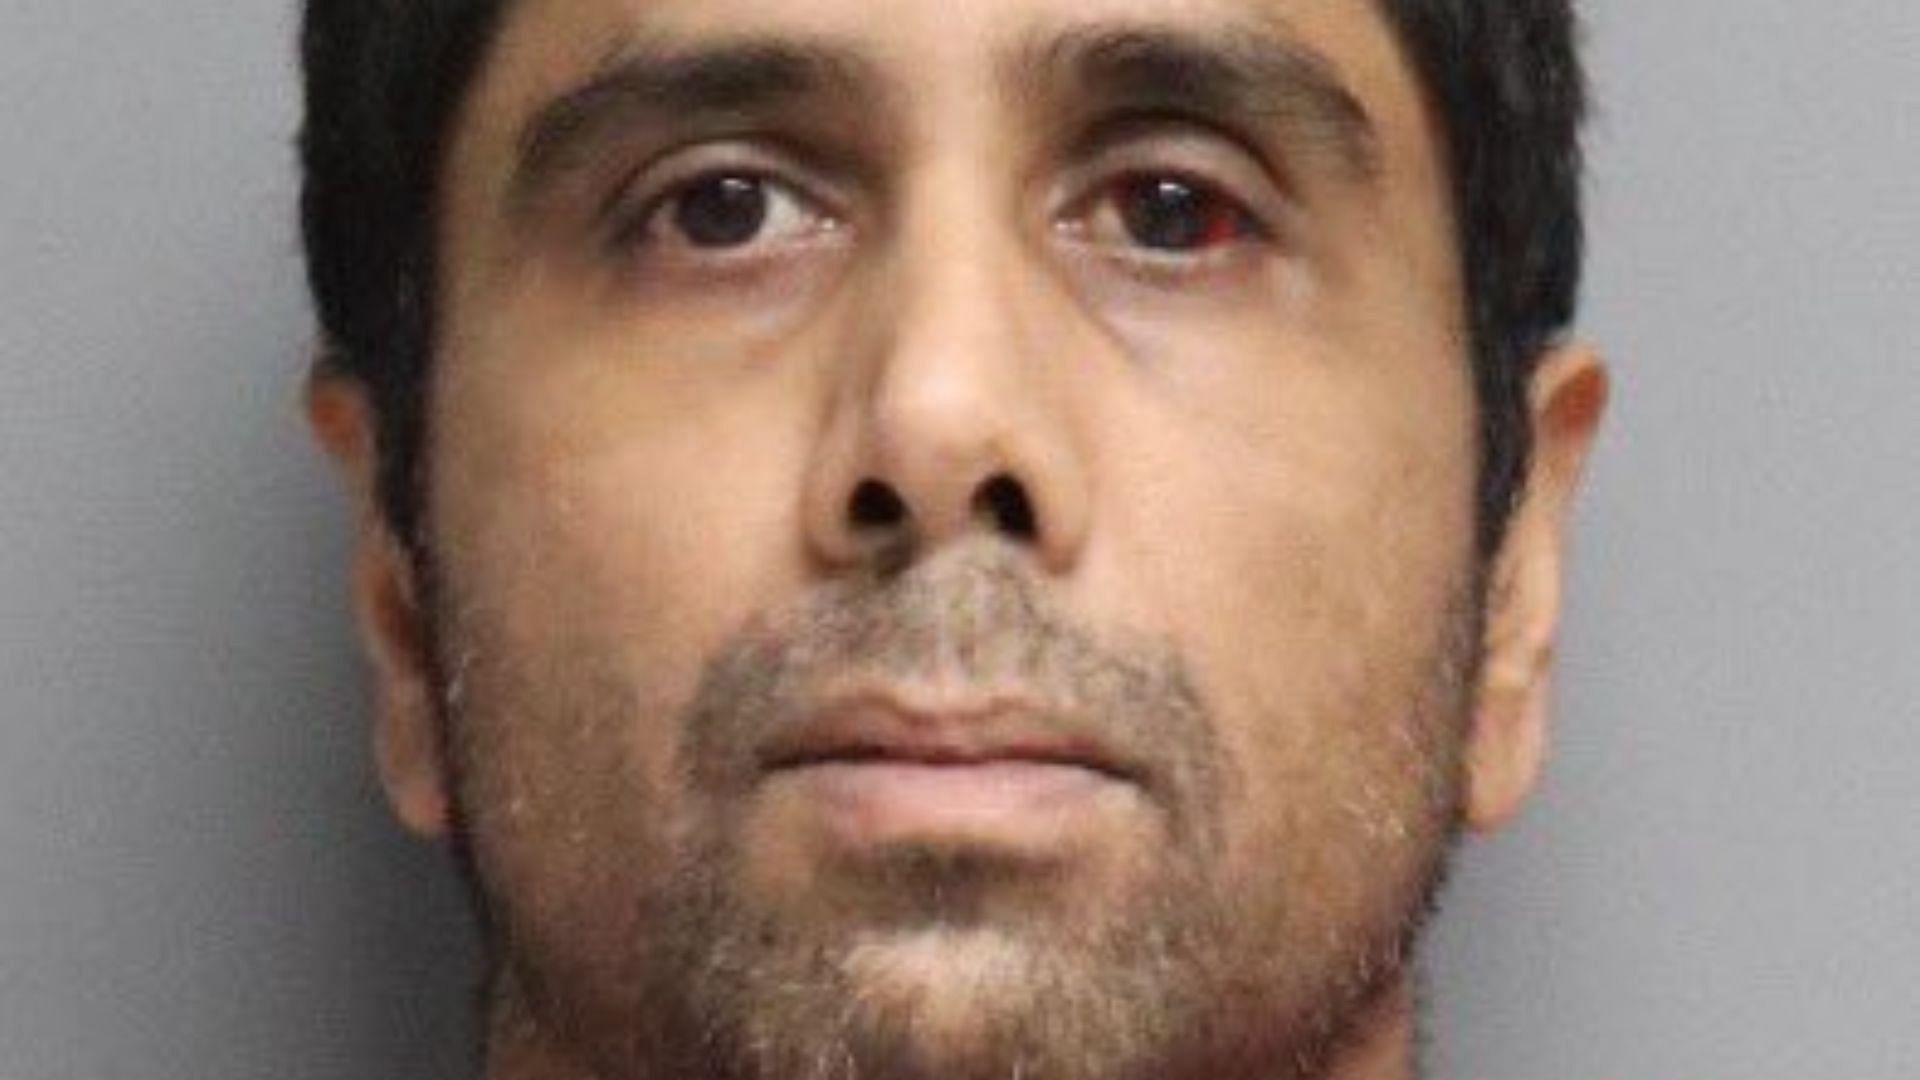 Dharmesh Patel pleaded not guilty to the multiple attempted murder charges against him. (Image via San Mateo County District Attorney